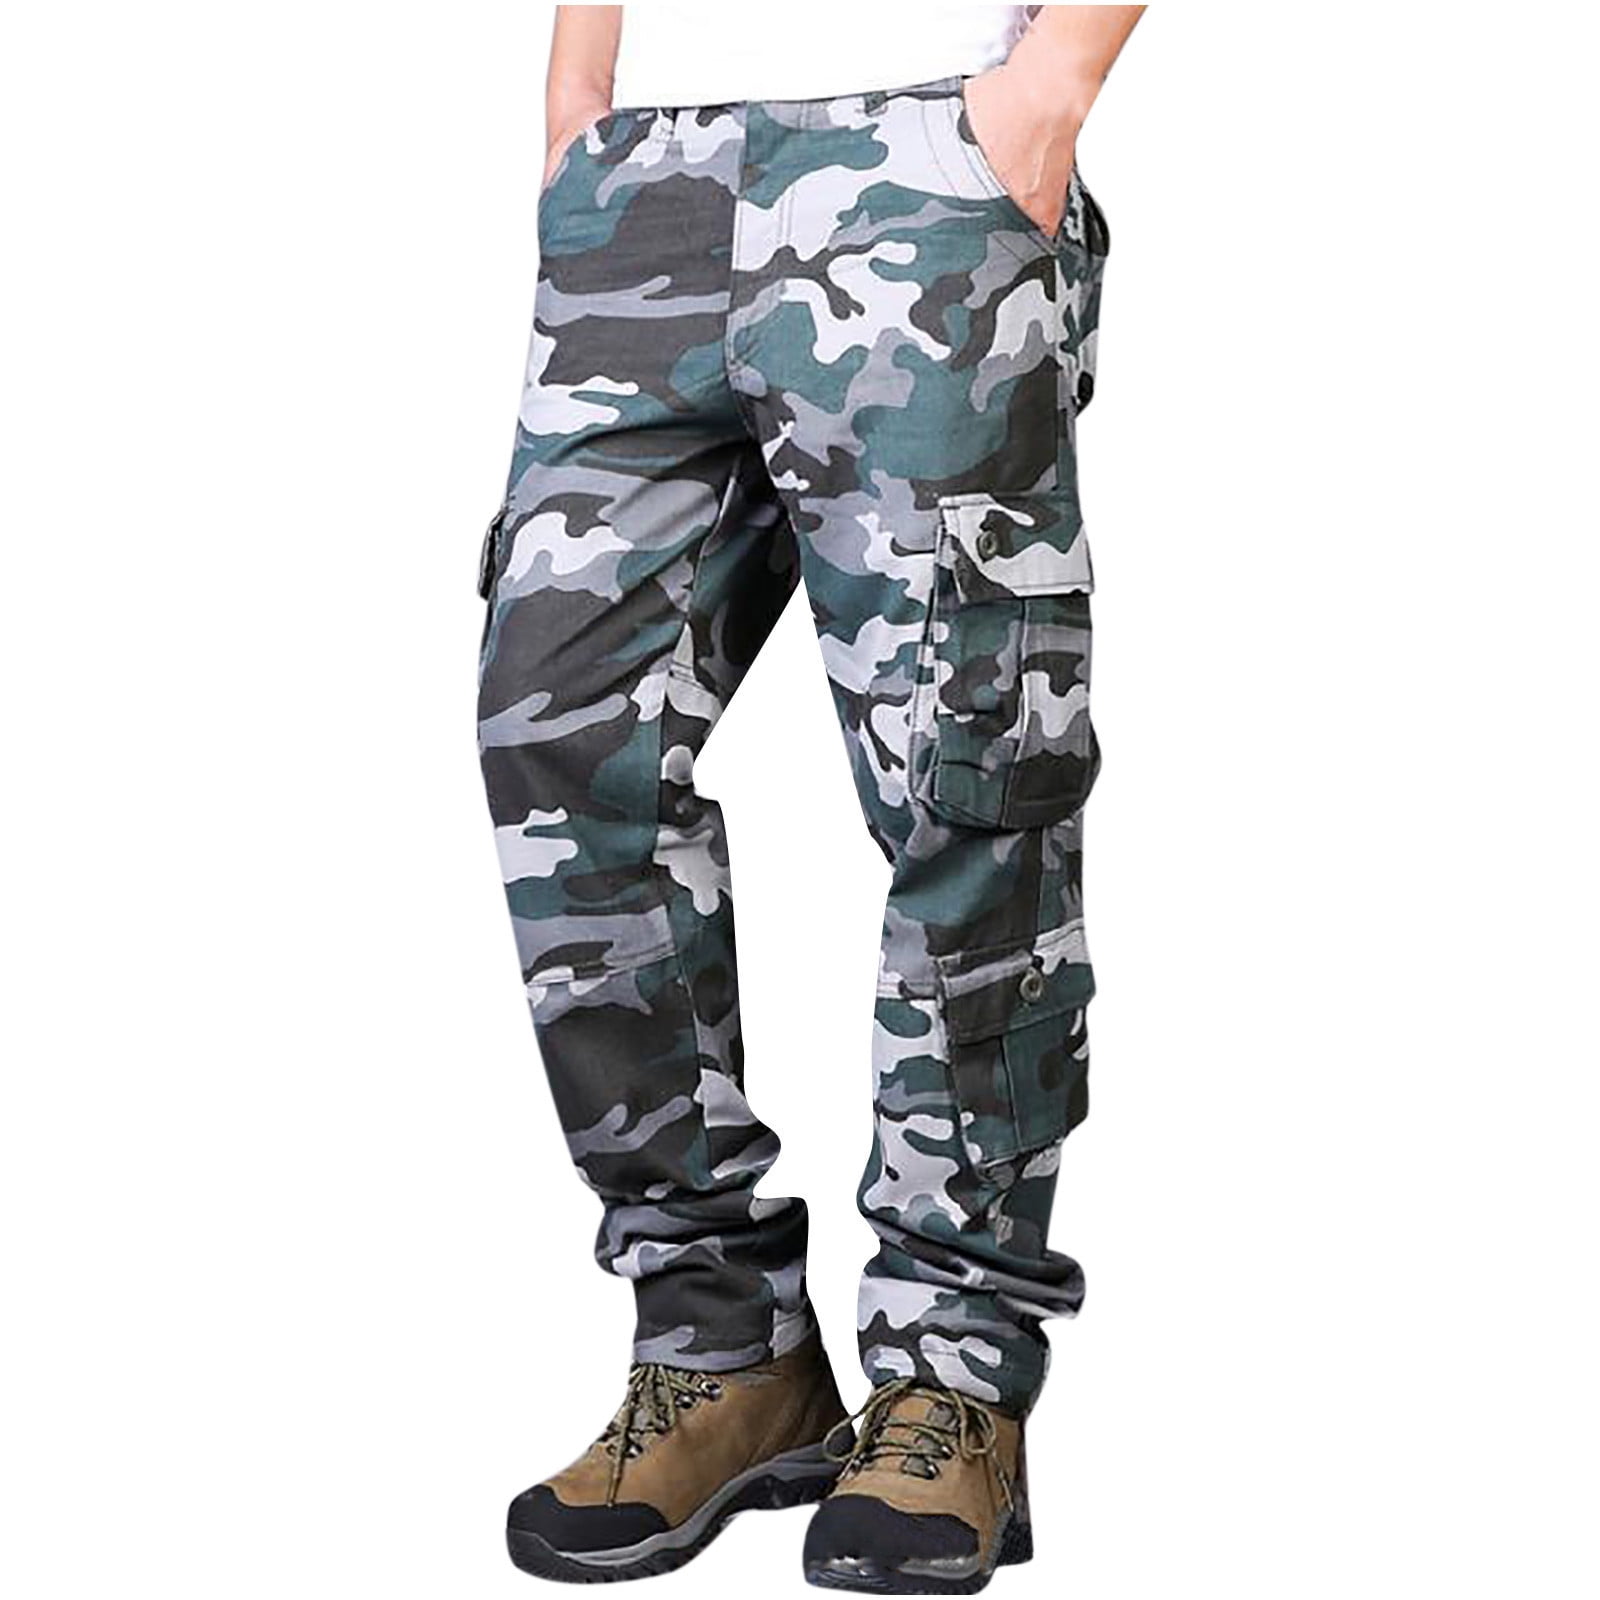 Clearance RYRJJ Men's Outdoor Hiking Pants Straight Type Tactical Pants  Lightweight Casual Work Ripstop Multi-Pockets Camo Cargo Pants(Blue,4XL) 